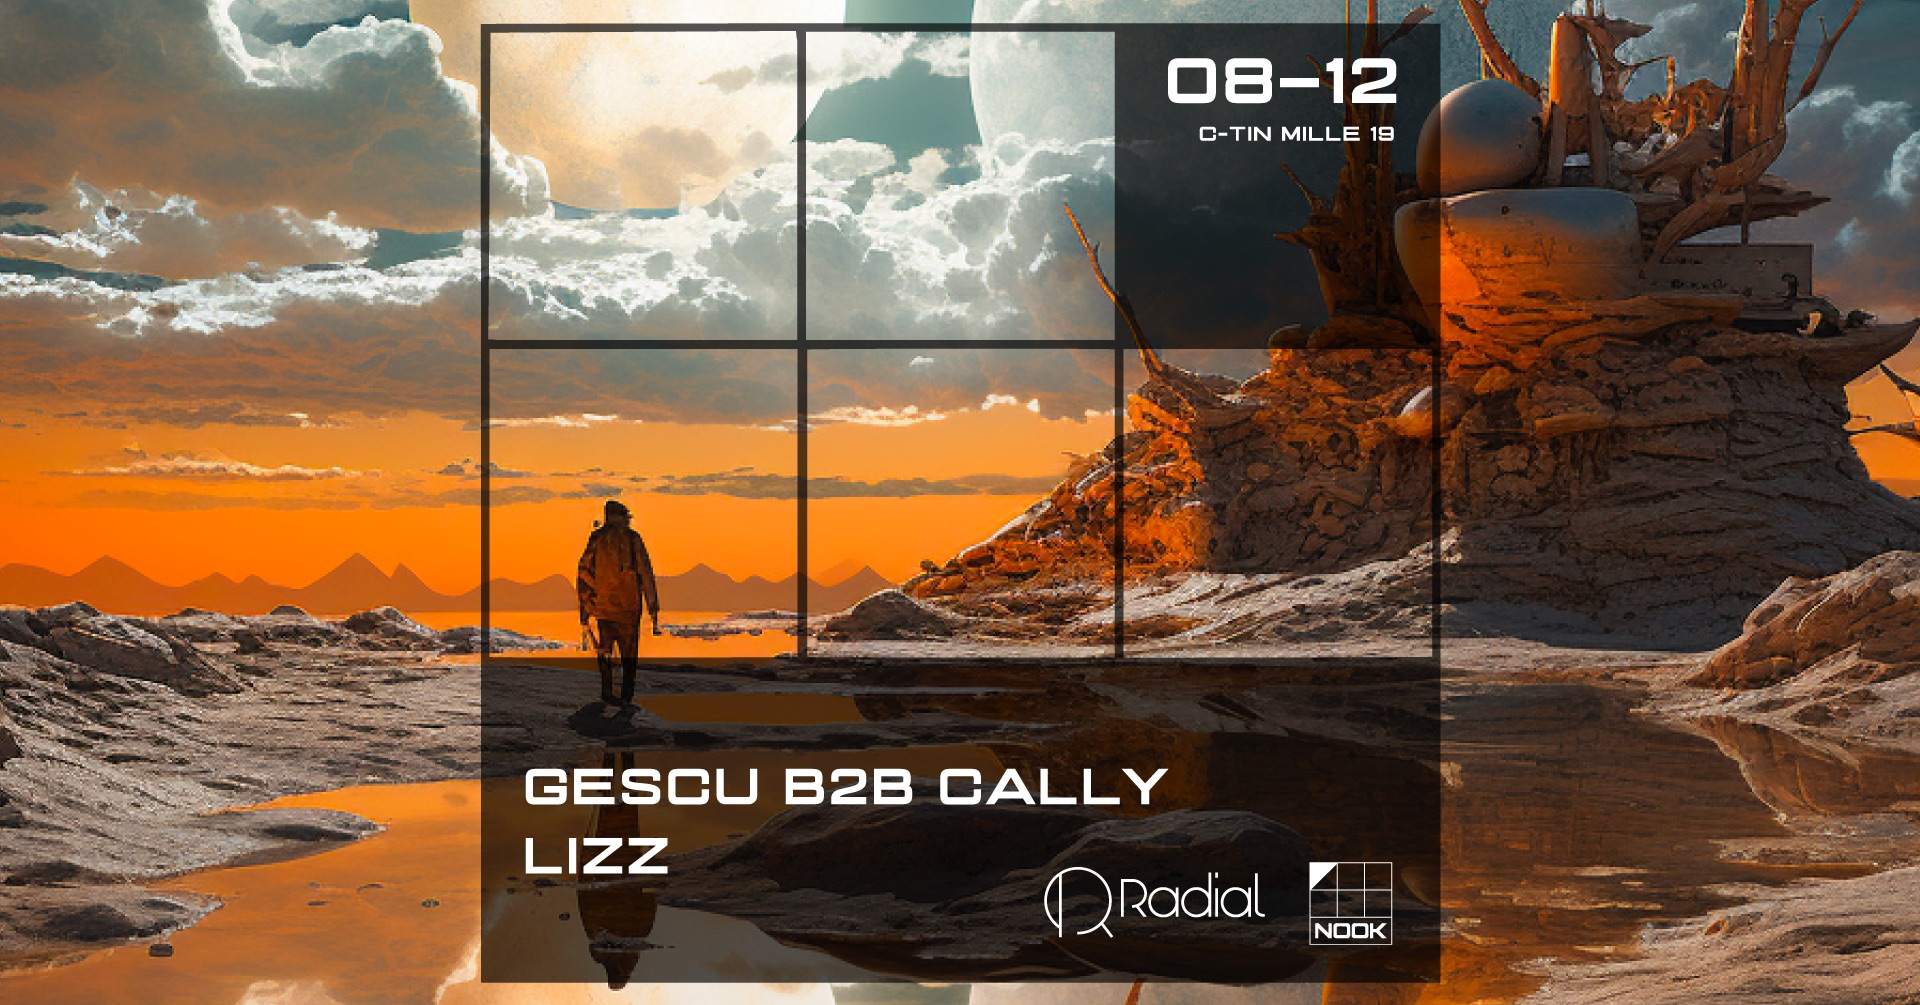 NOOK in with Gescu b2b caLLy, Lizz - フライヤー表